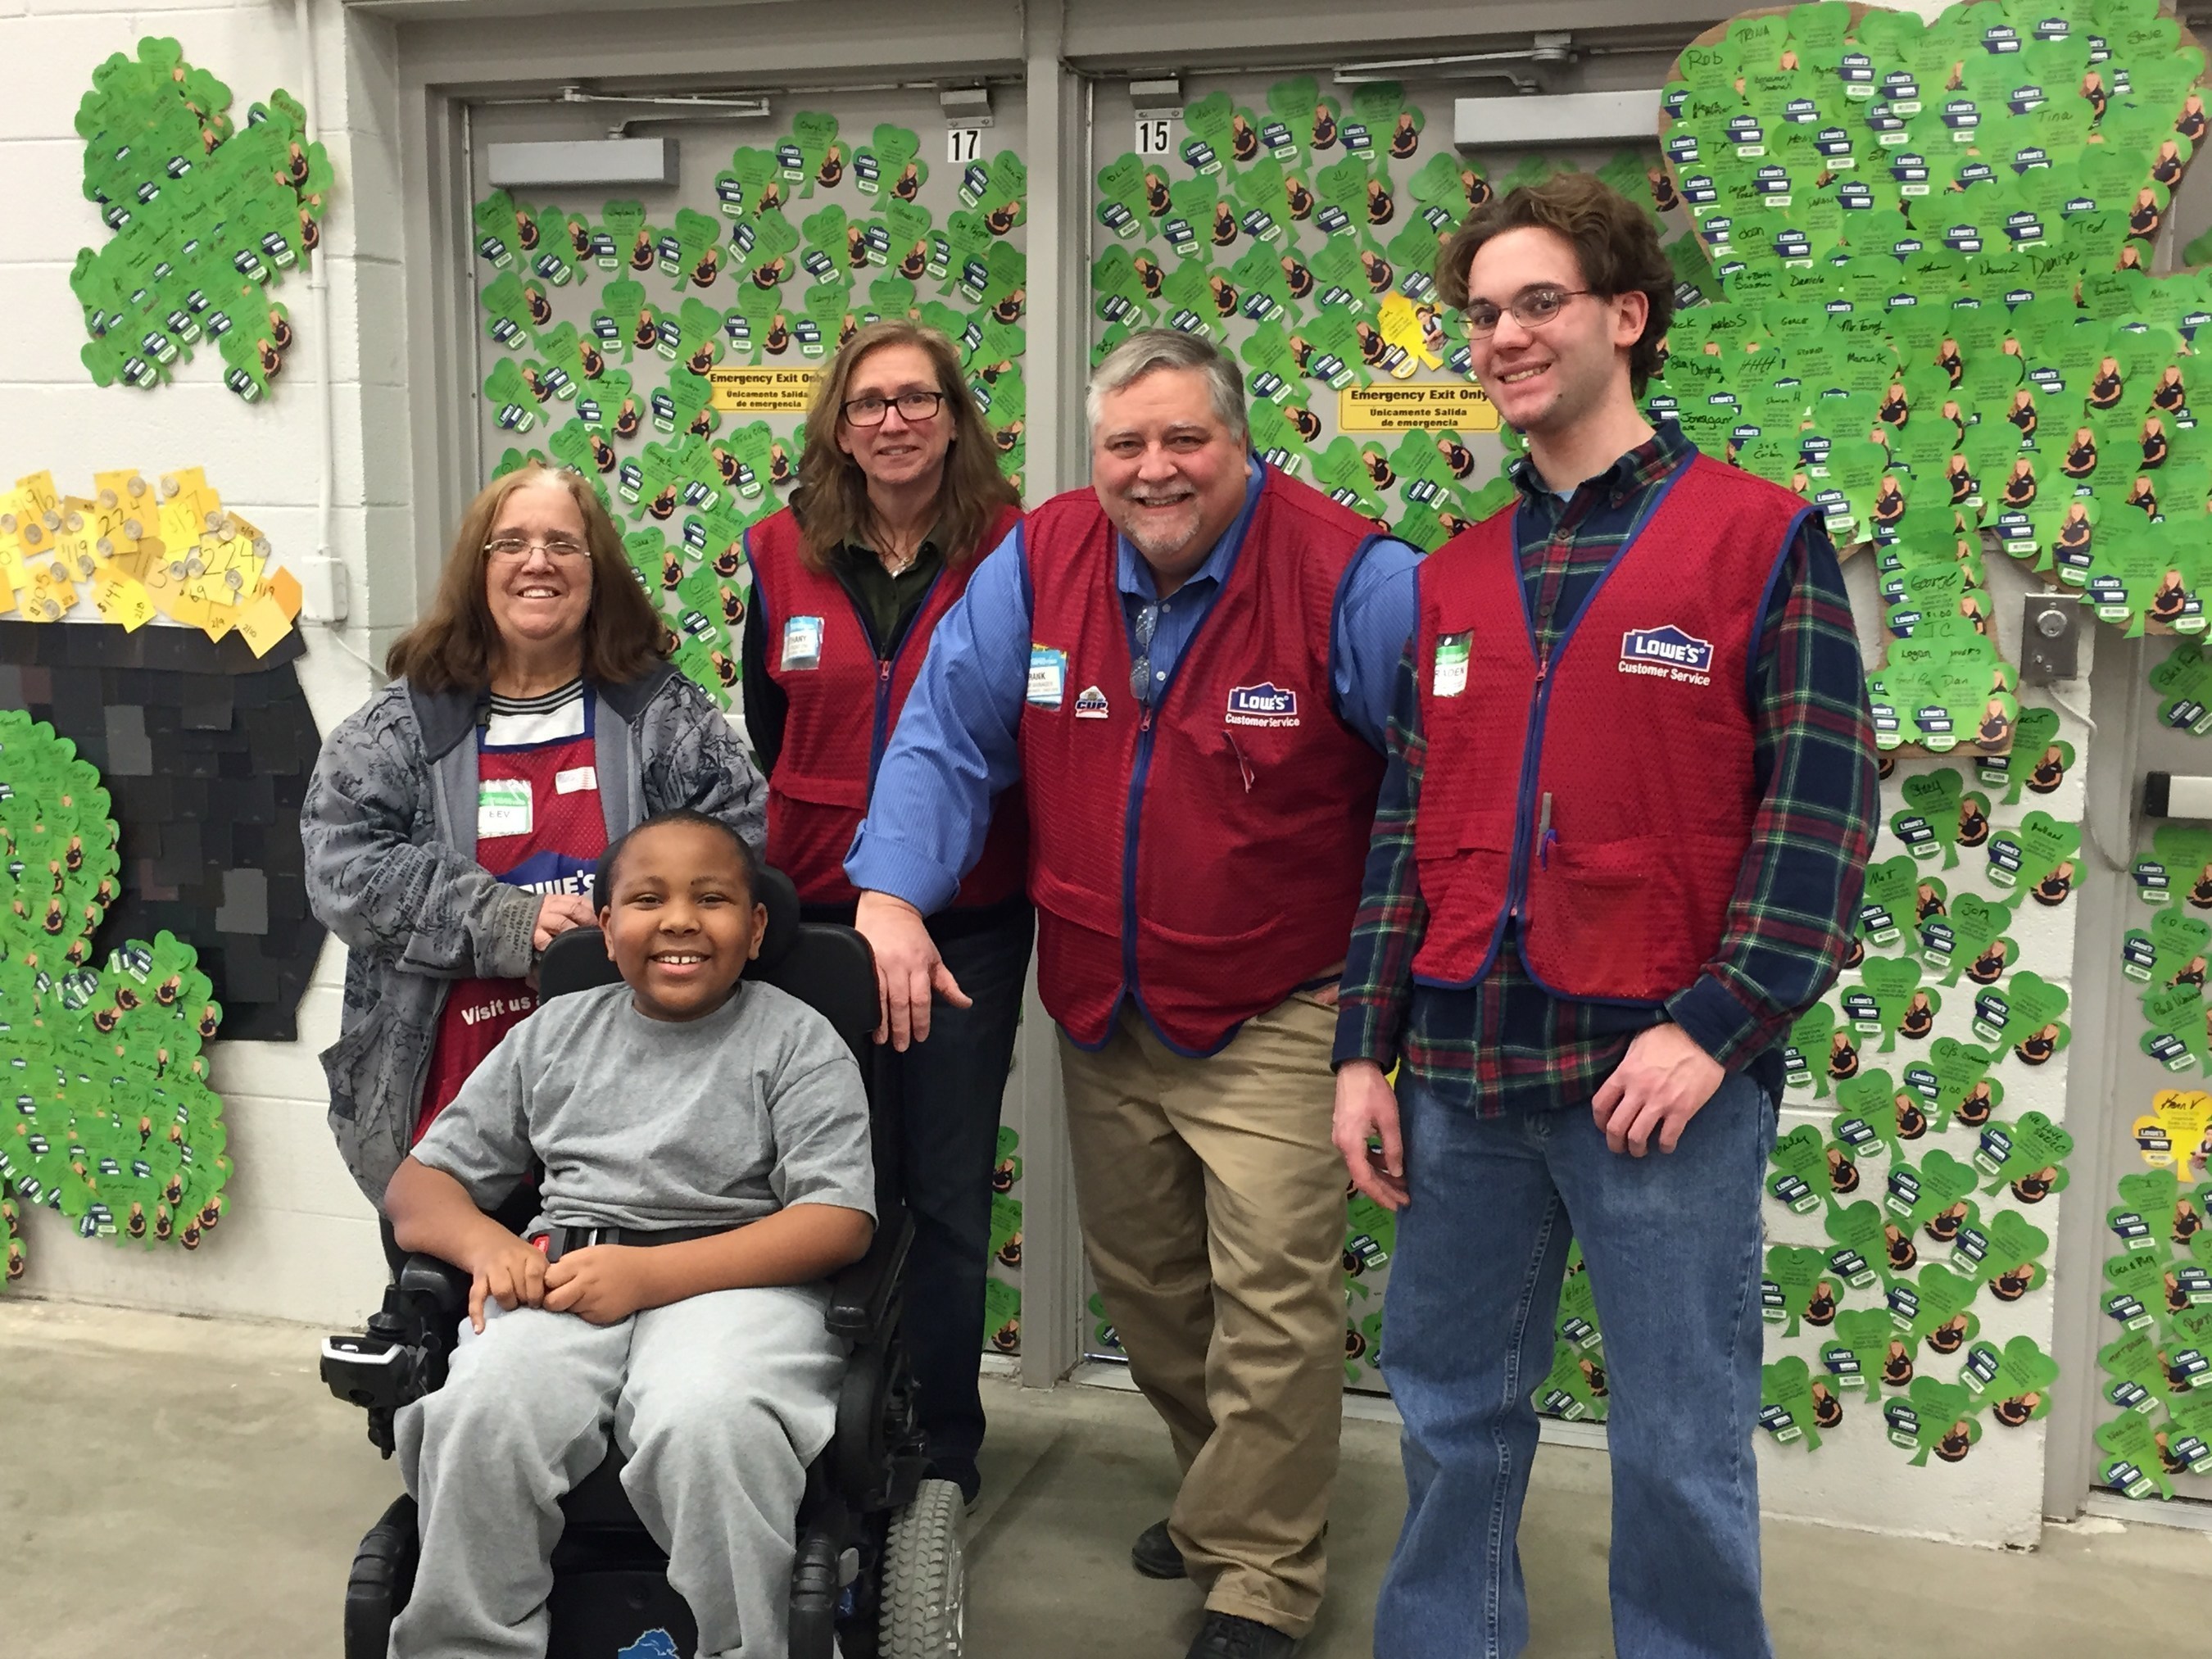 MDA Ambassador Torrance Johnson poses with employees from Lowe's store 734 in Ypsilanti, Mich. in front of their special MDA Shamrock display. Shamrocks bought at checkout during the program were also creatively showcased on the walls of many other Lowe's stores across the country.